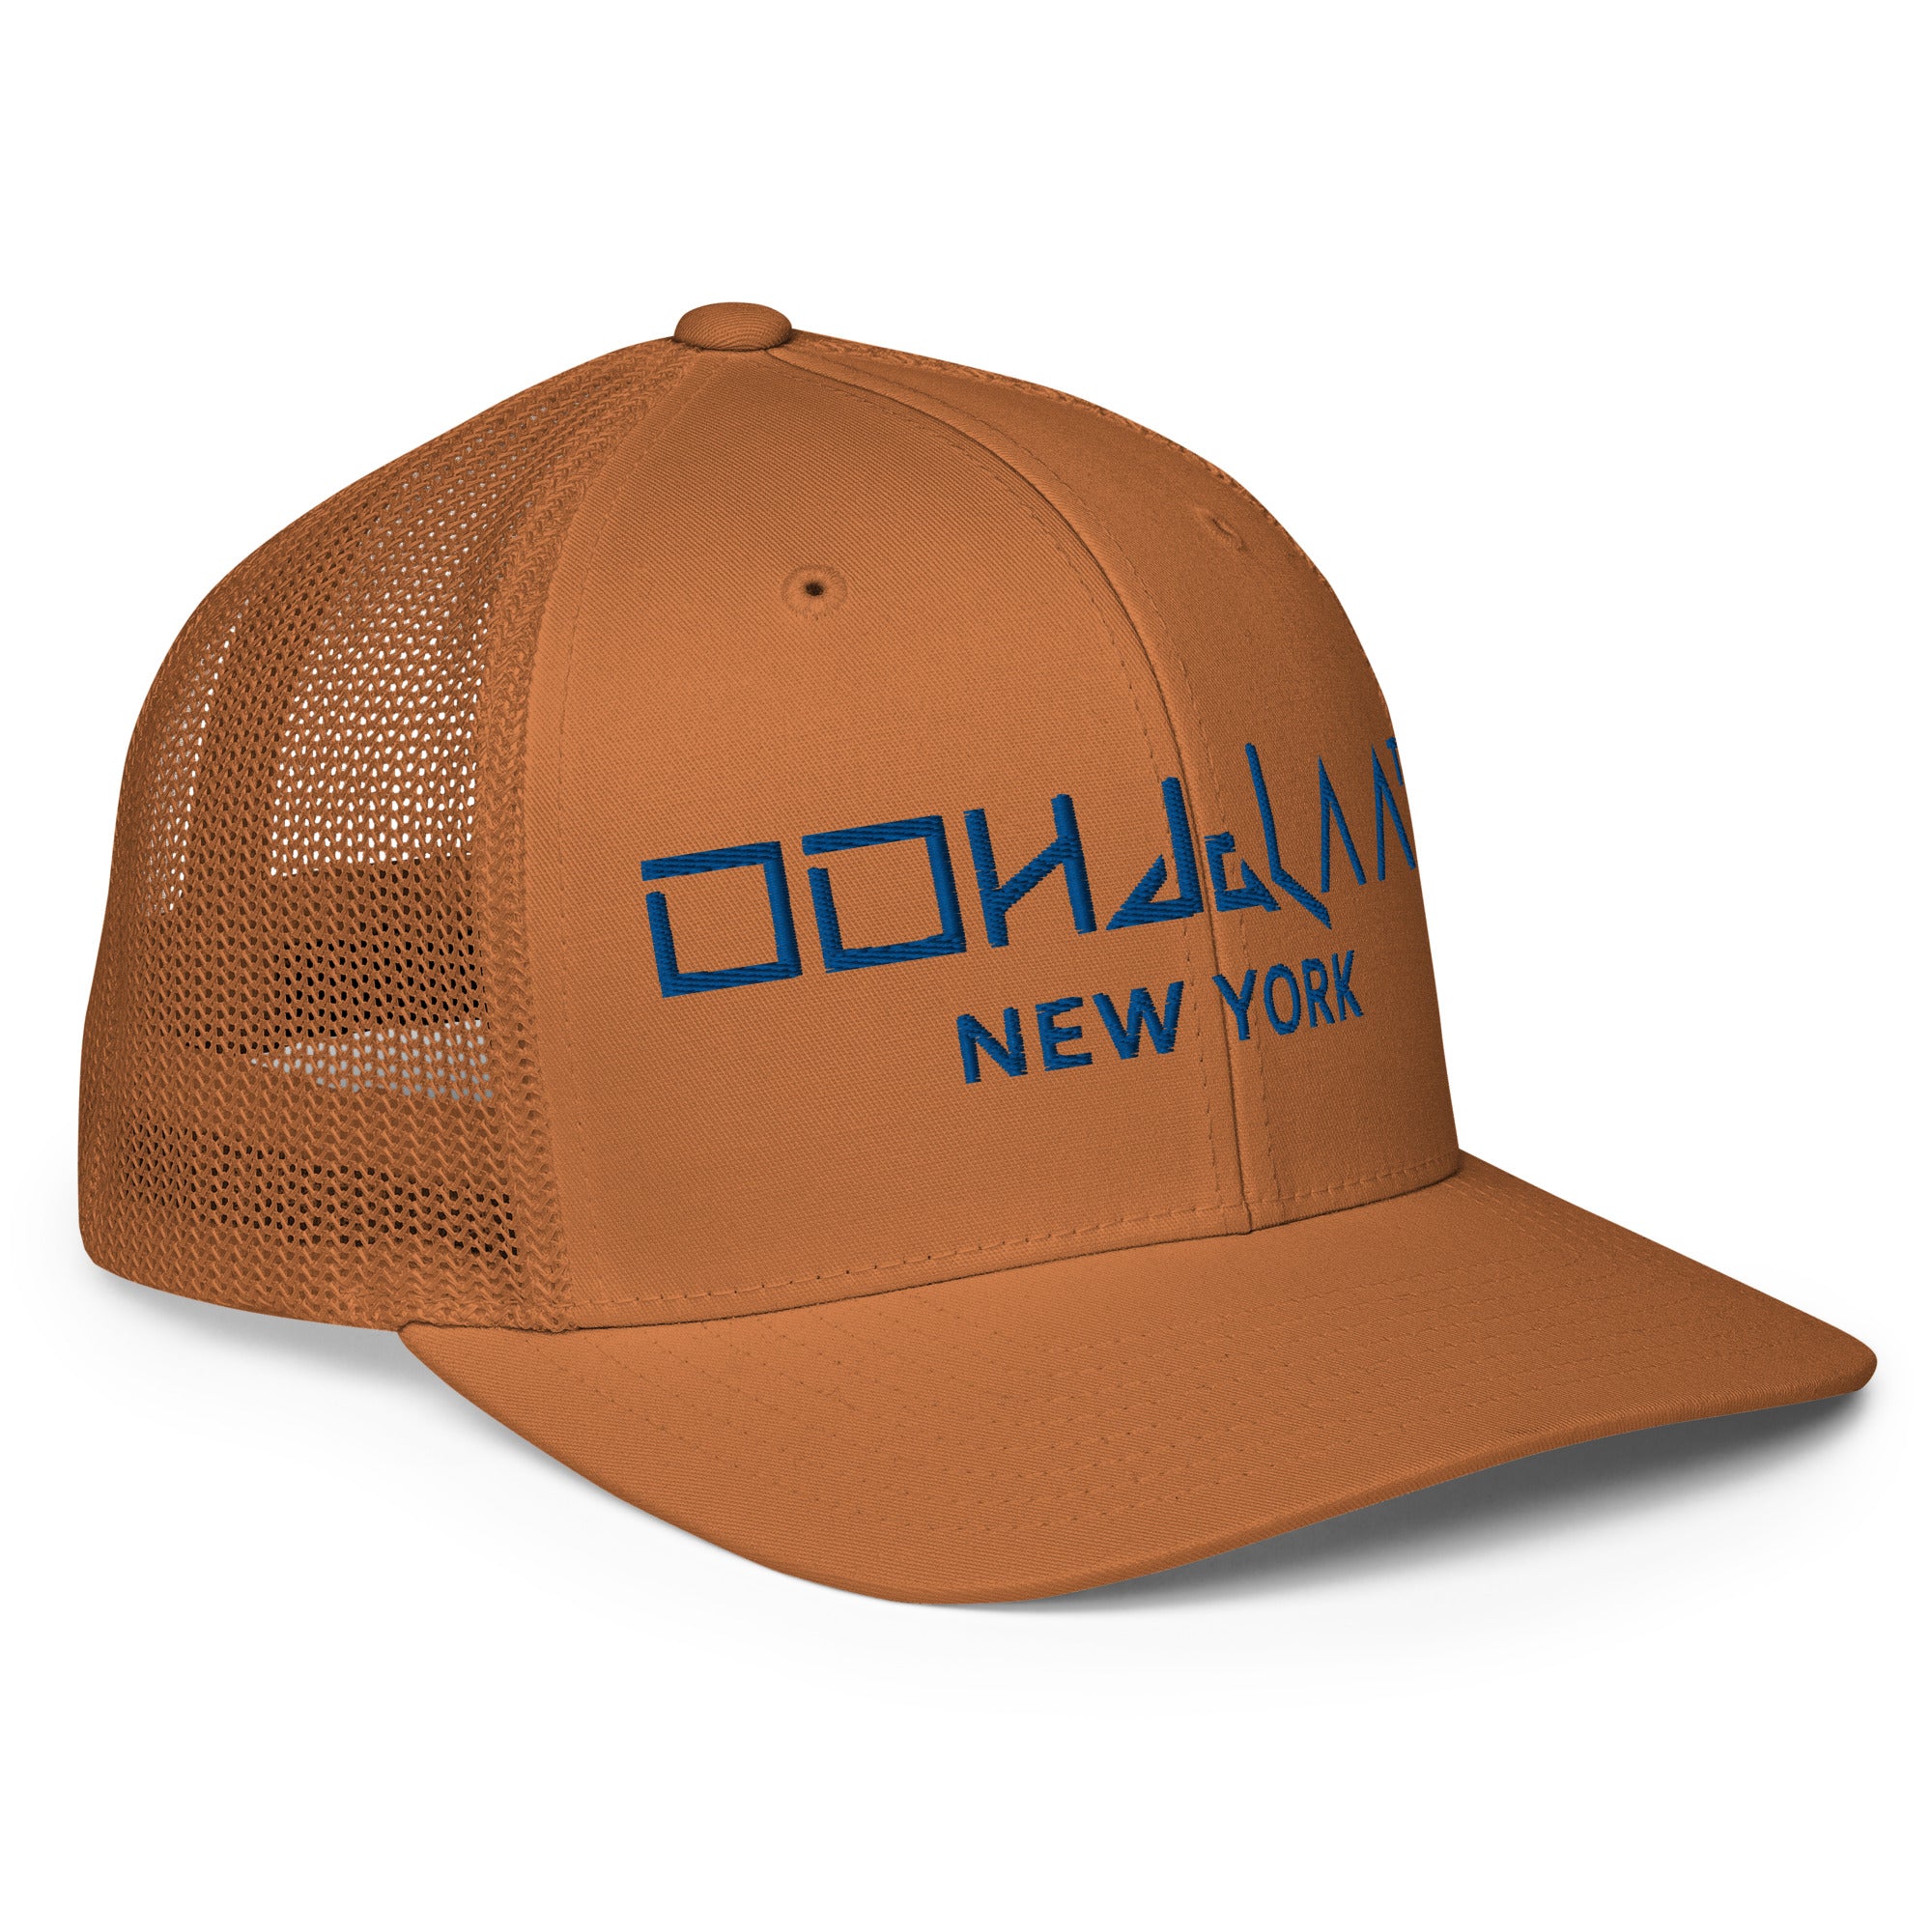 OOHdaLAA "Elegance Enigma" Luxury Brown Trucker Hat  Title: Elevate Your Style with the OOHdaLAA New York Embroidered Brown Trucker Hat - A Fusion of Luxury and Urban Chic